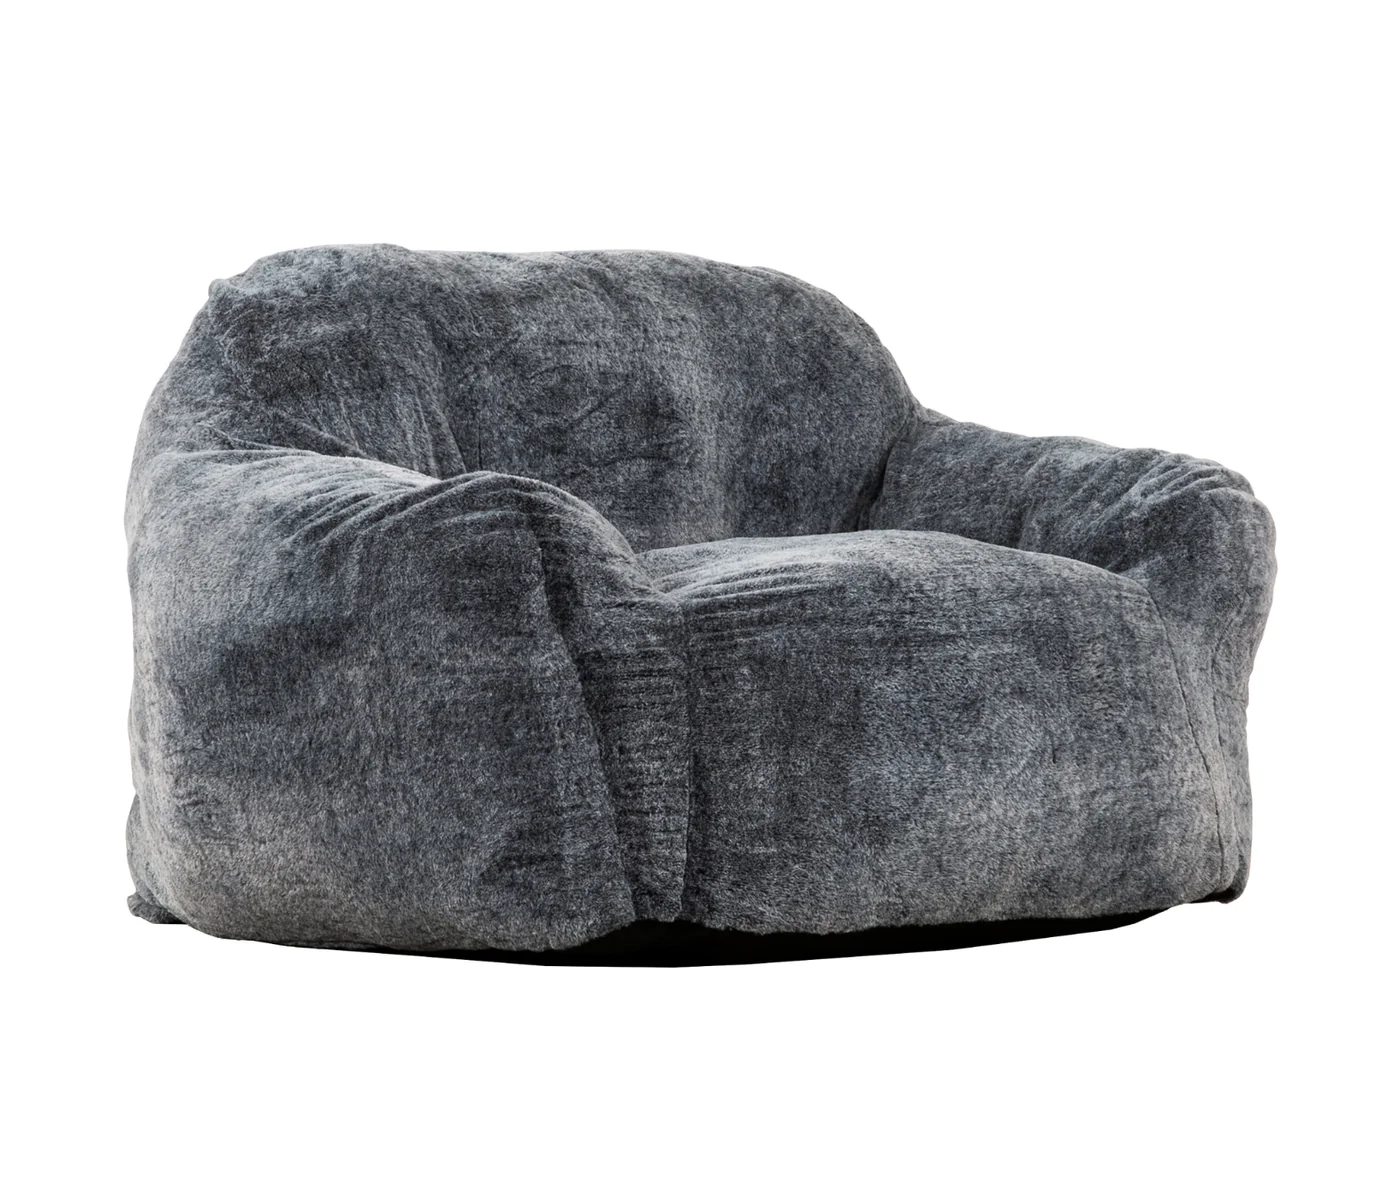 Side view of Sly Tore Bean Bag Chair